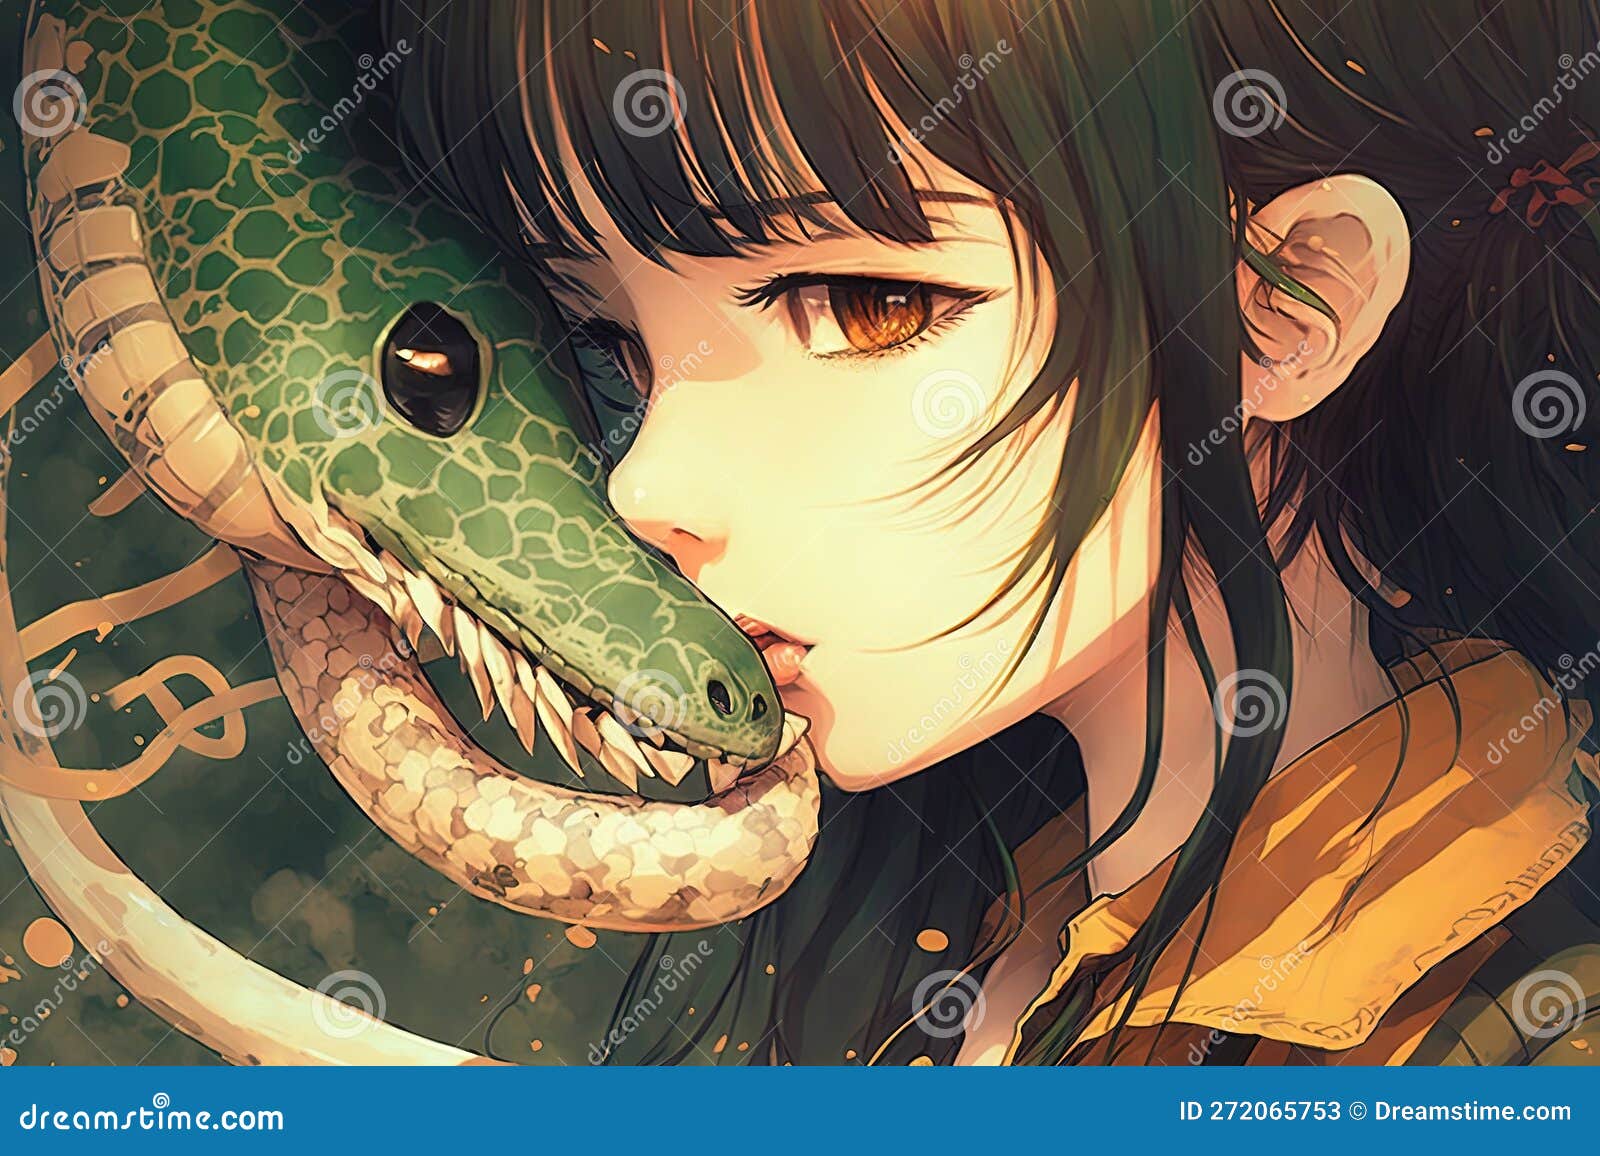 HD wallpaper Anime Boy with Snake male anime character illustration  Artistic  Wallpaper Flare